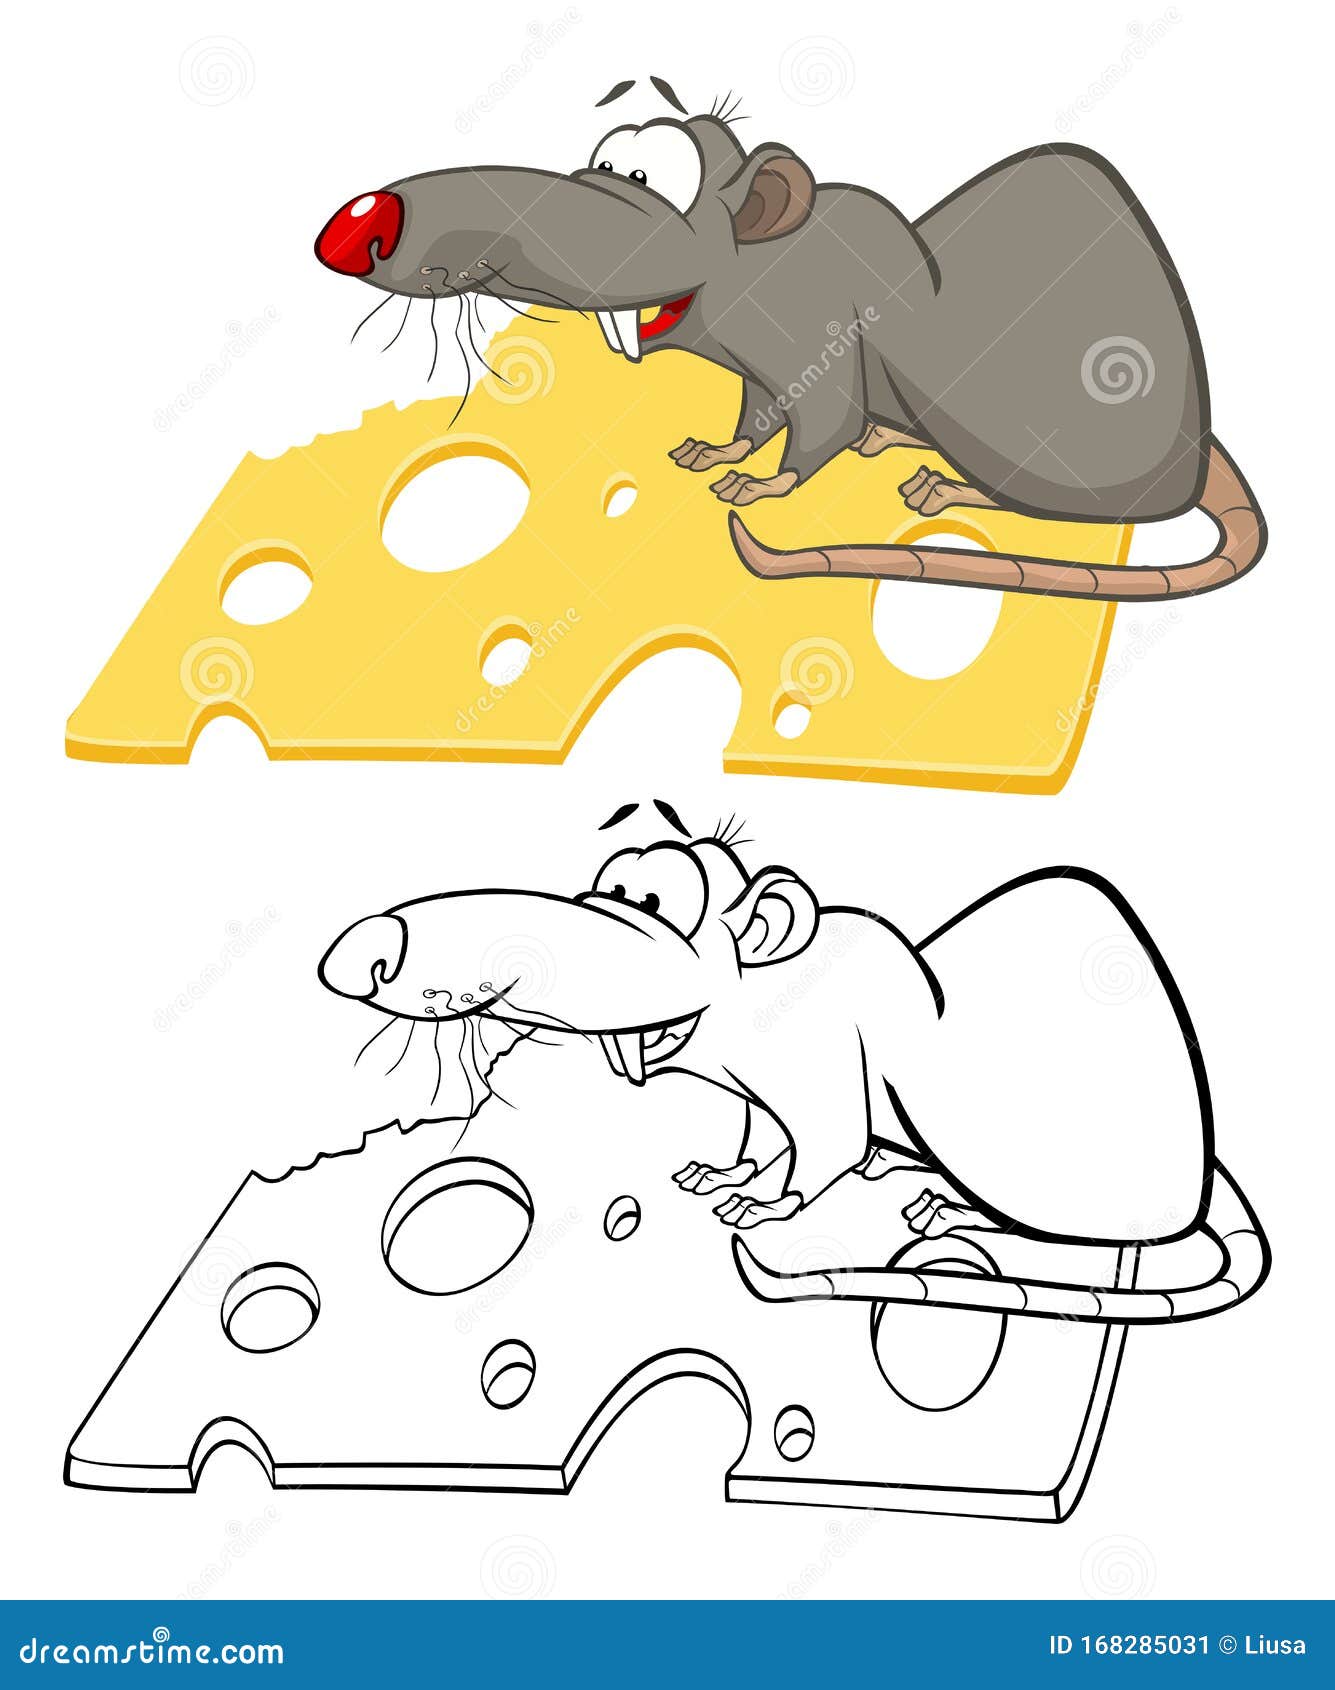 Download Vector Illustration Of A Cute Cartoon Character Rat For You Design And Computer Game. Coloring ...